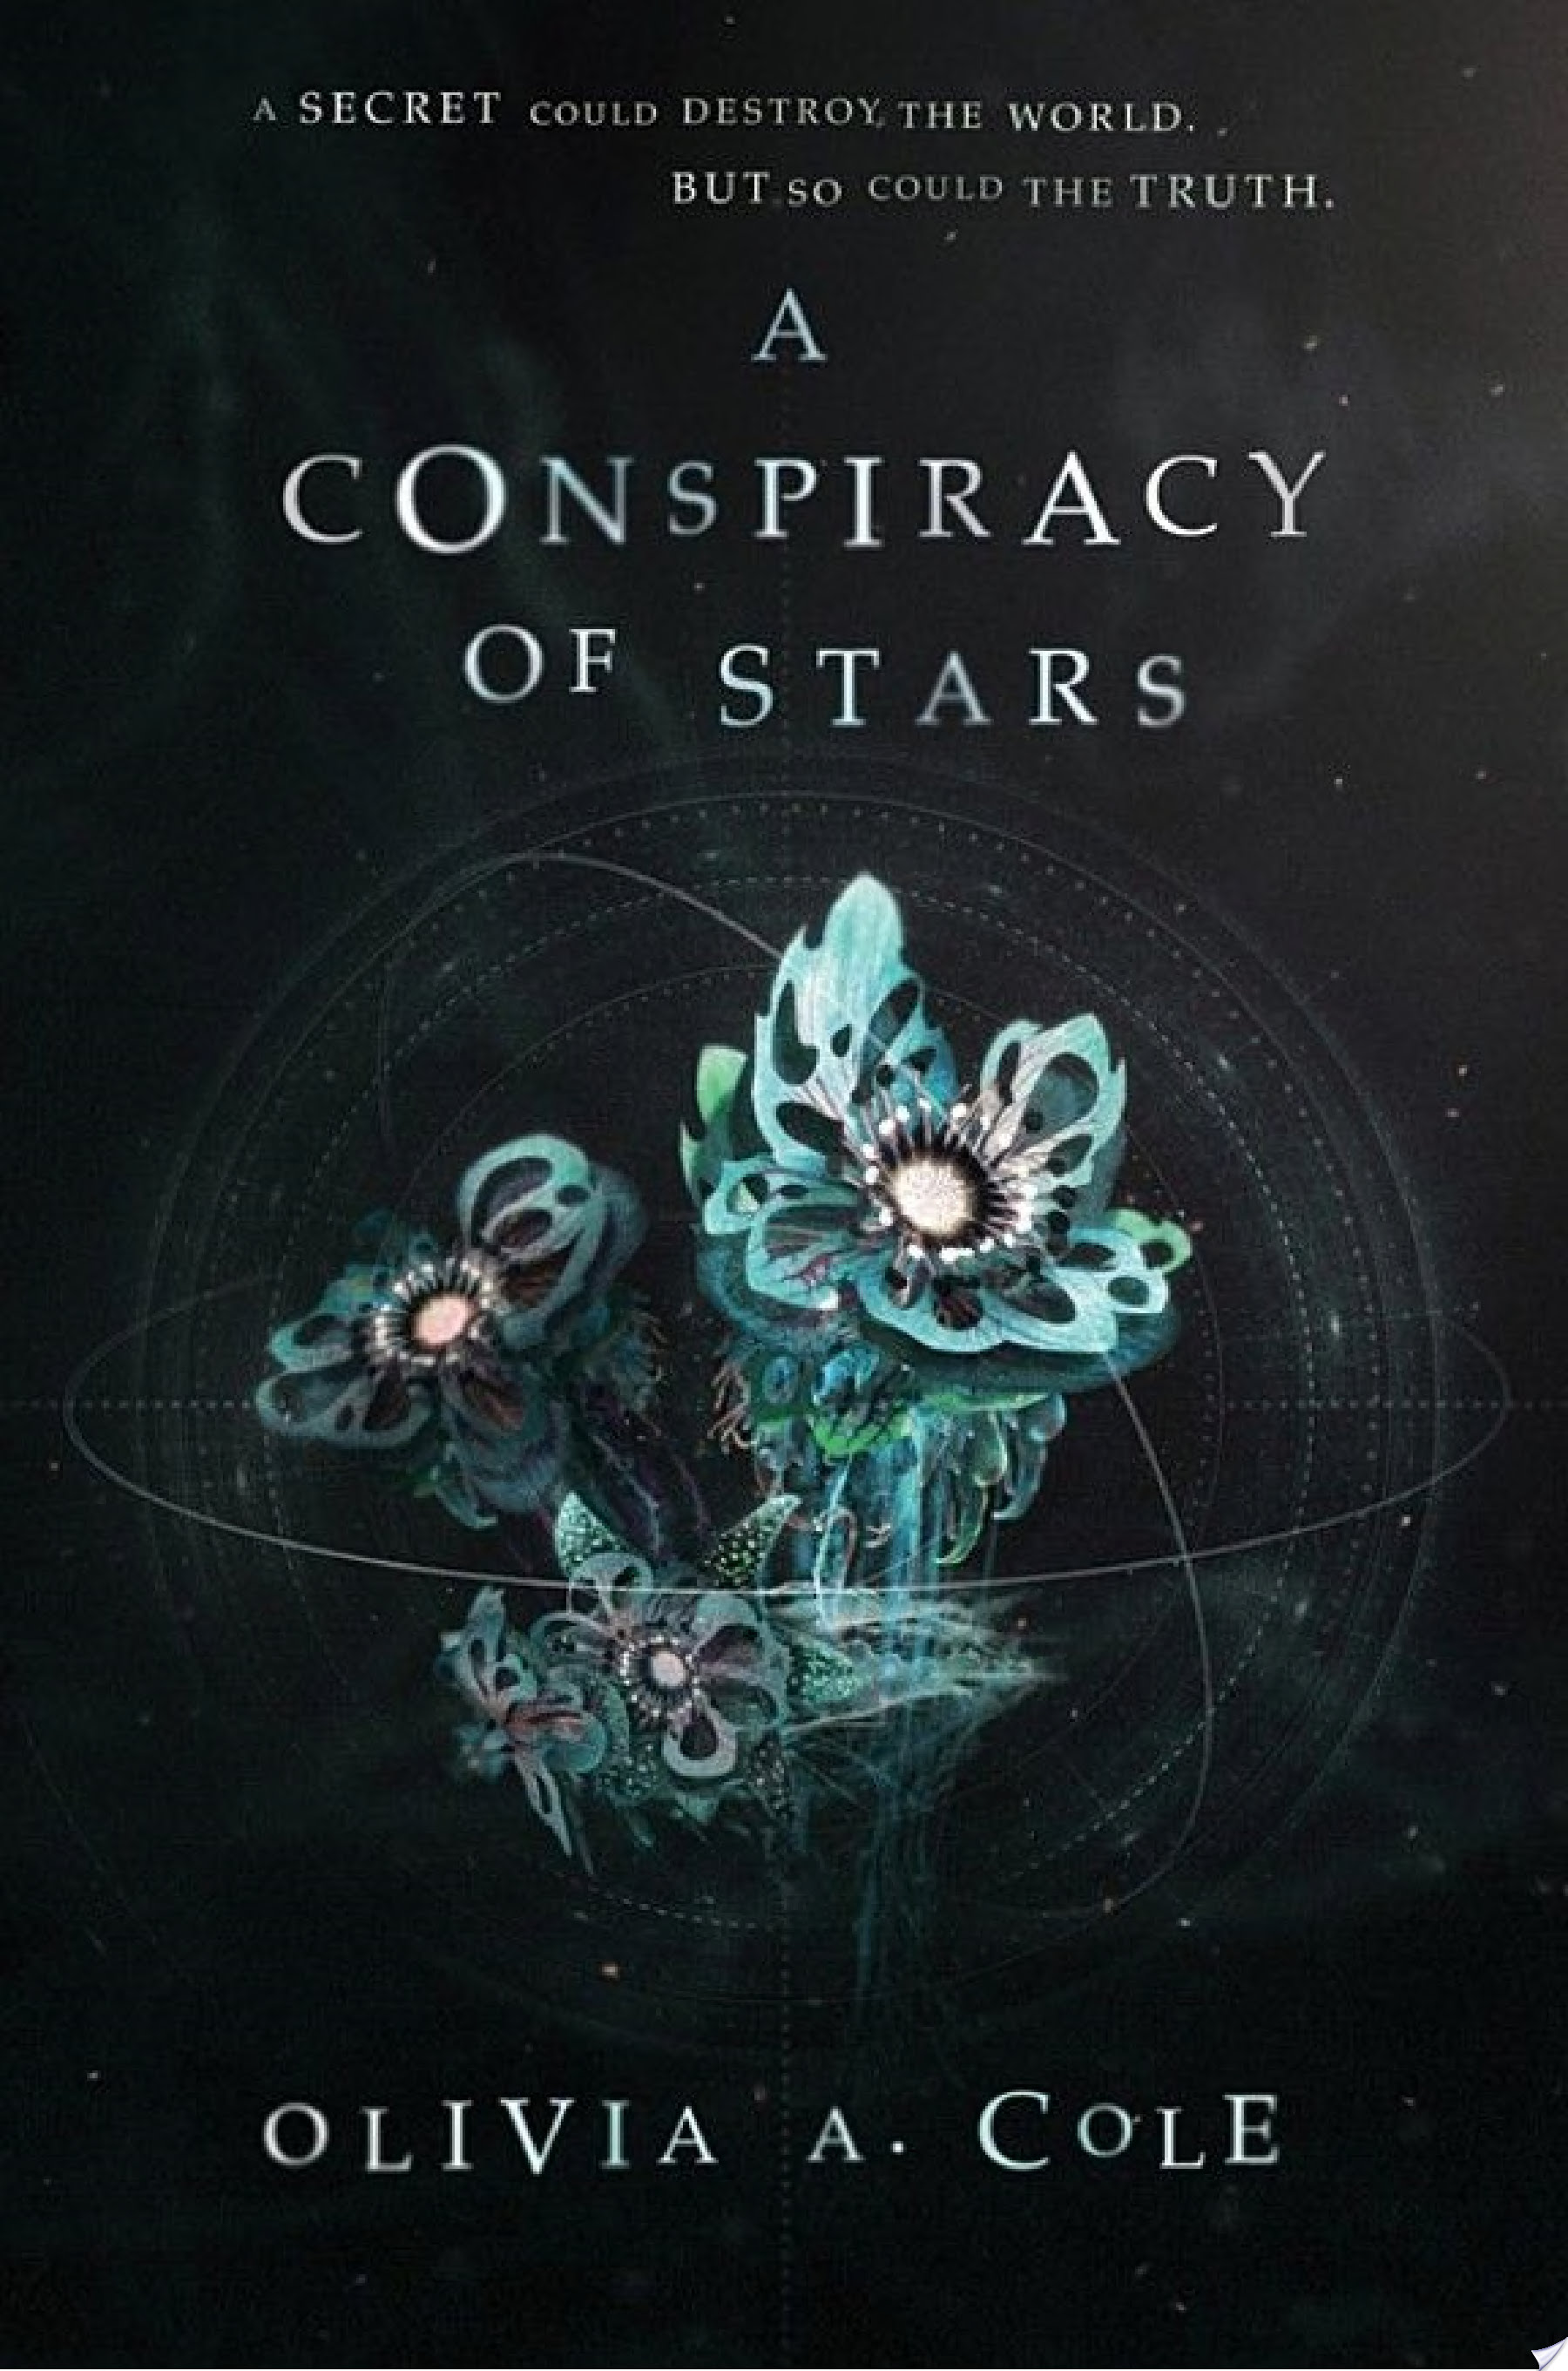 Image for "A Conspiracy of Stars"